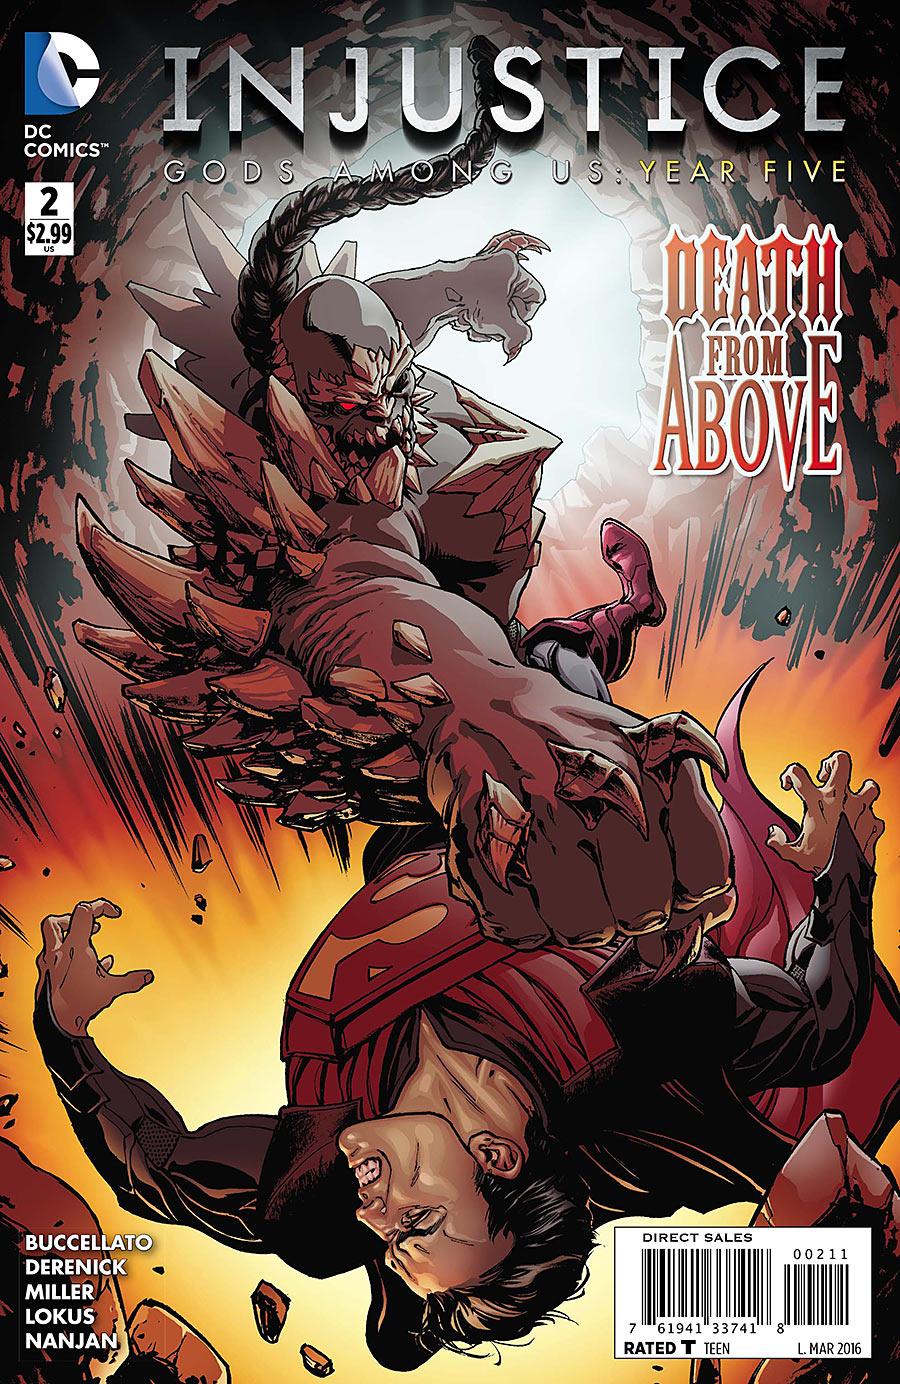 Injustice: Gods Among Us: Year Five Vol. 1 #2